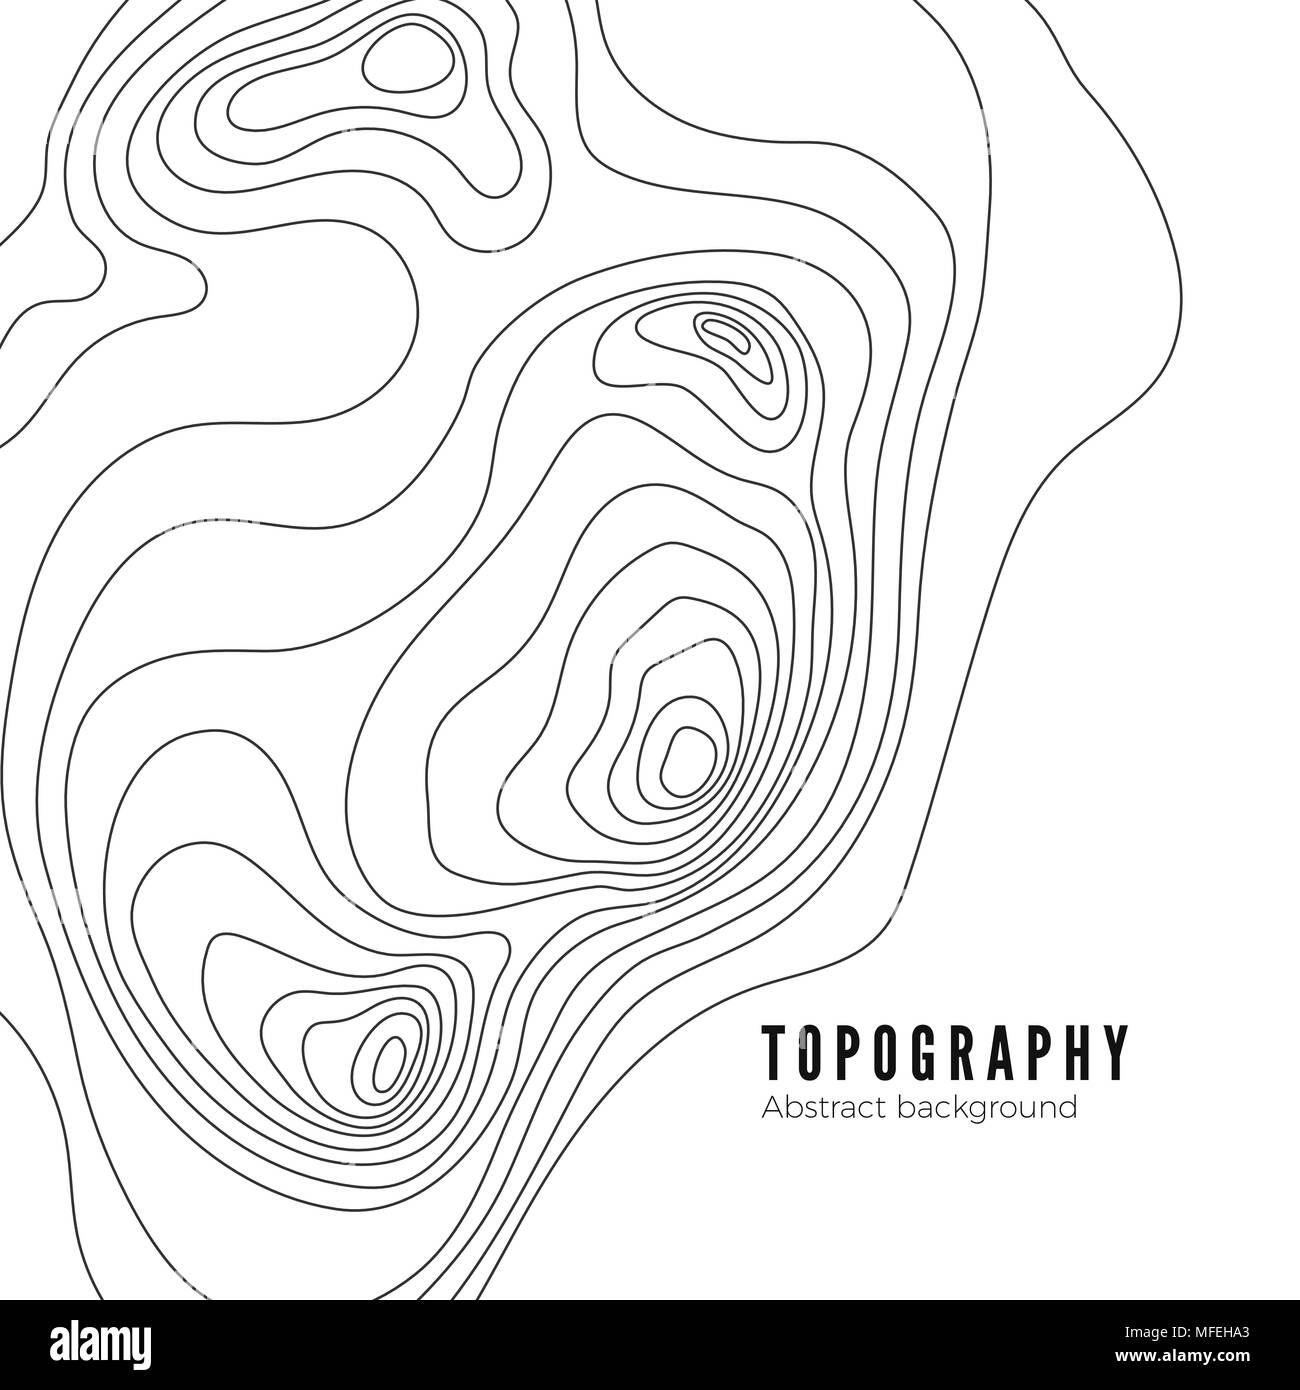 Landscape Geodesy Topography Map Line Texture. Vector Background Pattern Stock Vector